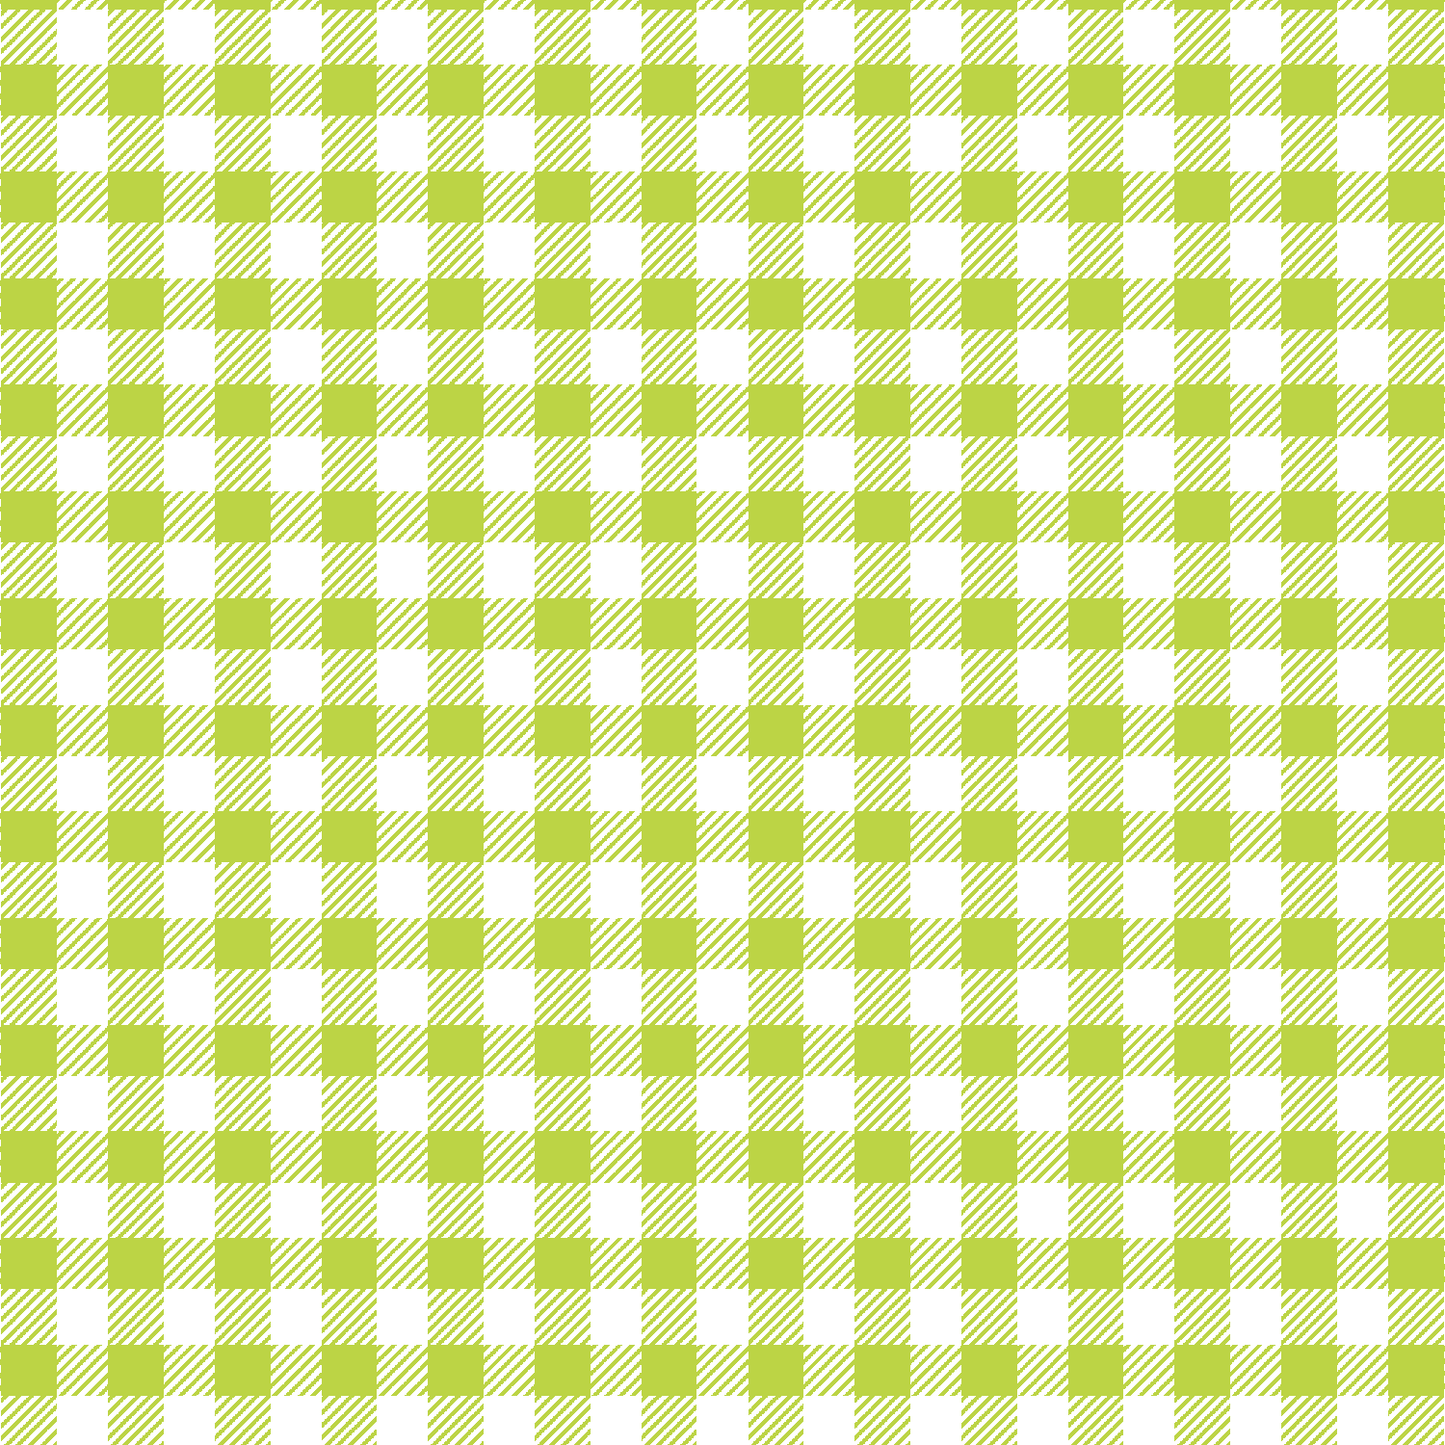 Small Buffalo Plaid in Lime